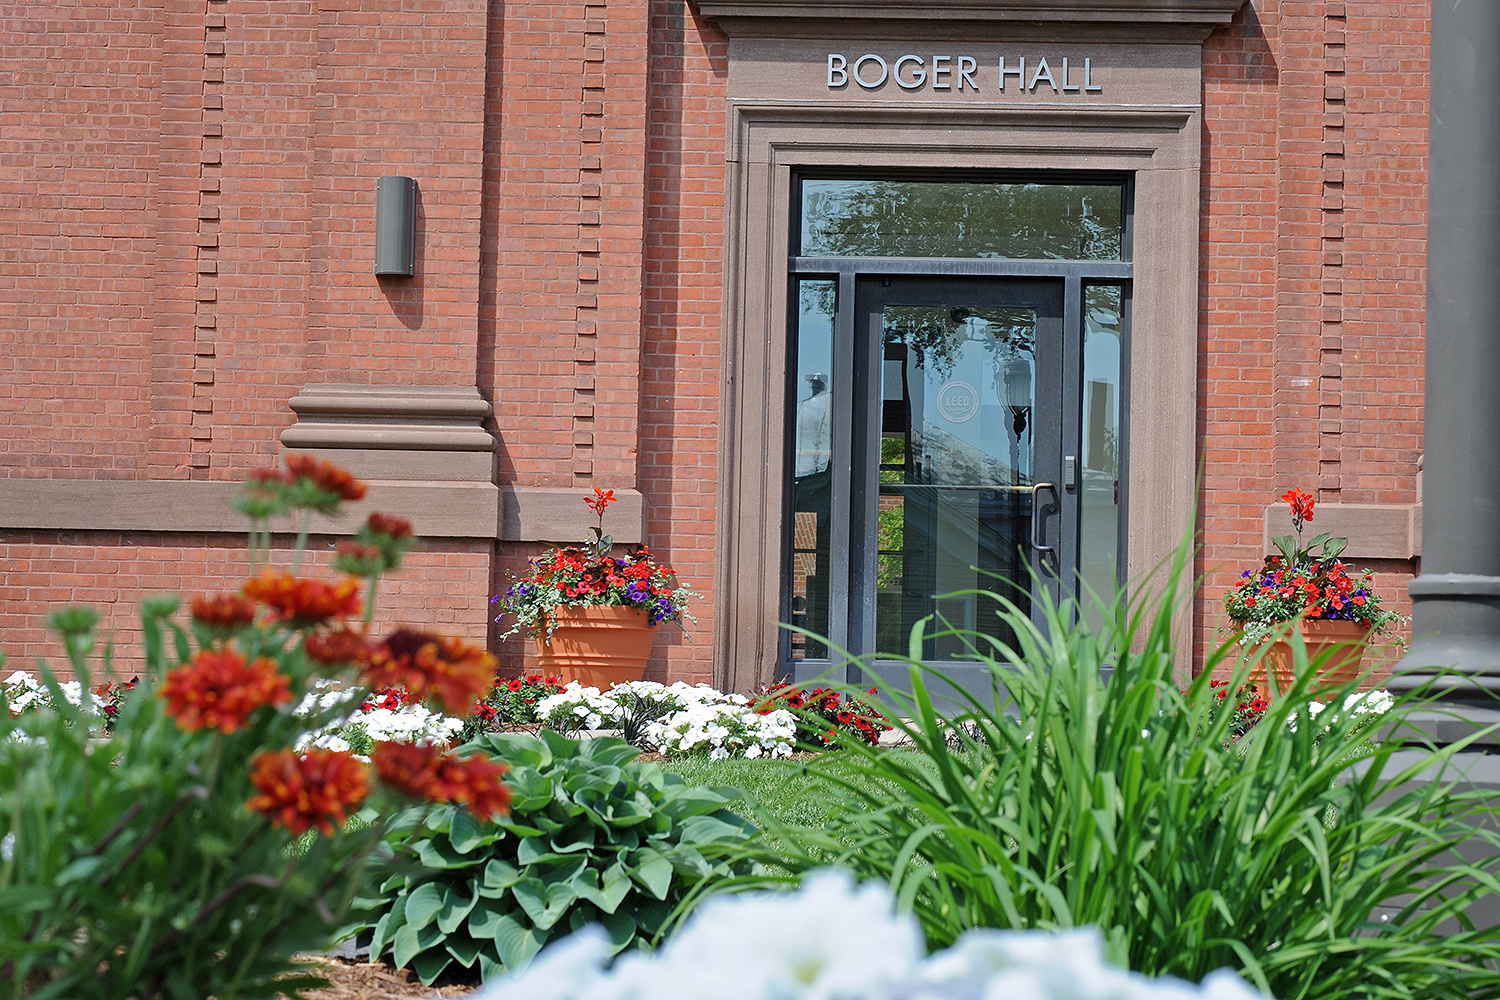 Petunias, geraniums and other flowers are planted near Boger Hall.